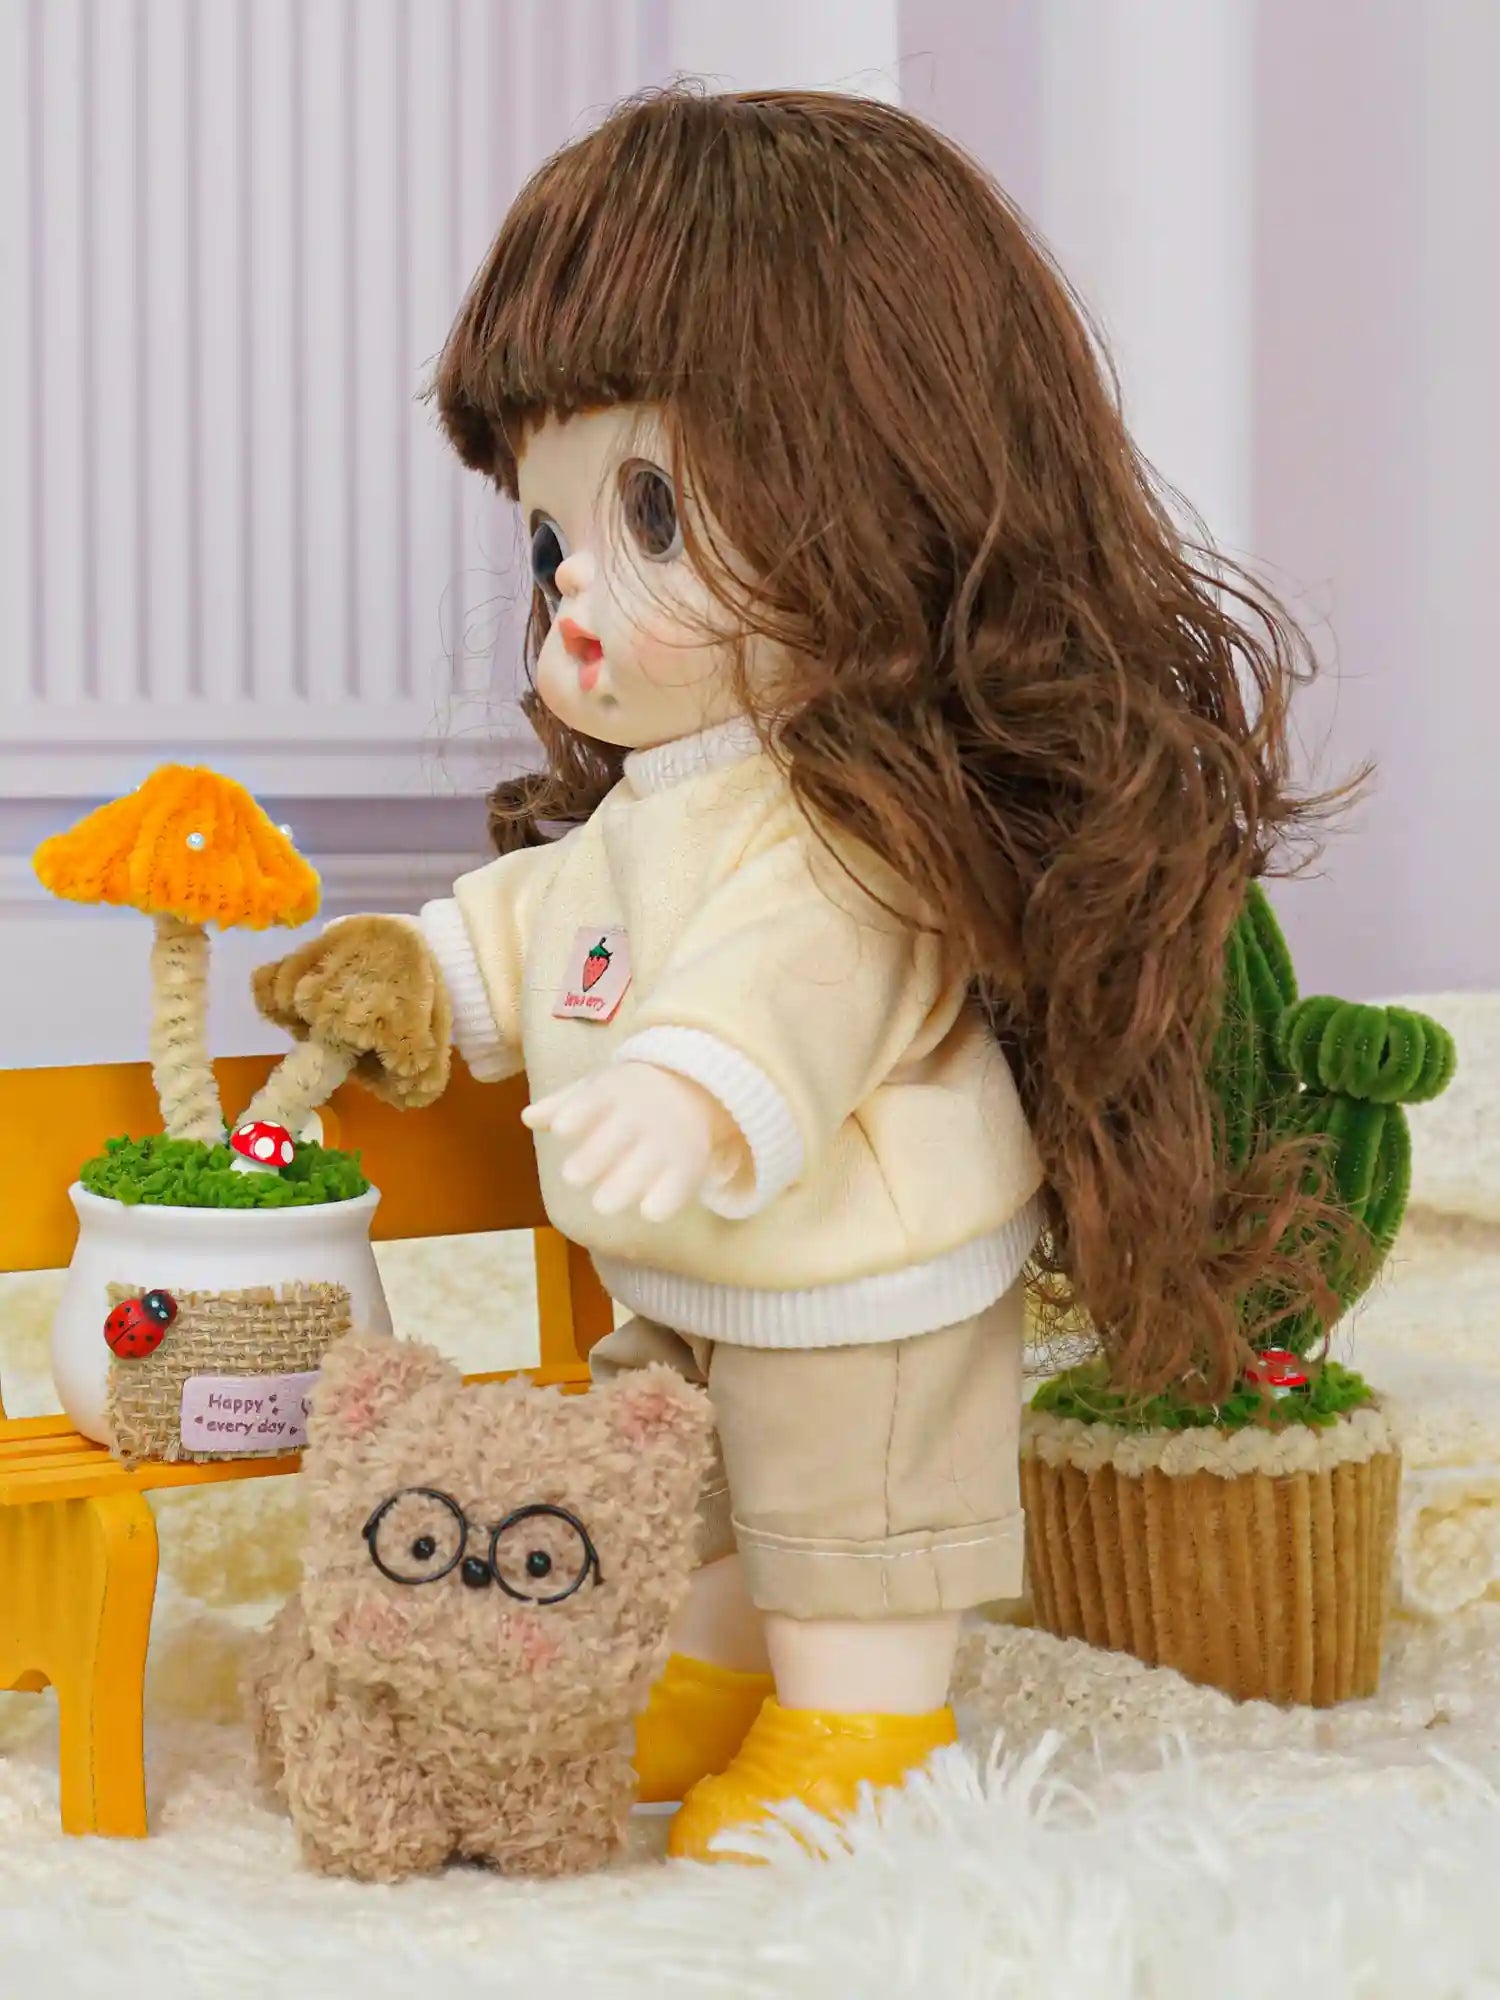 A childlike doll with a welcoming pose in casual play attire, accompanied by a whimsical furry friend.